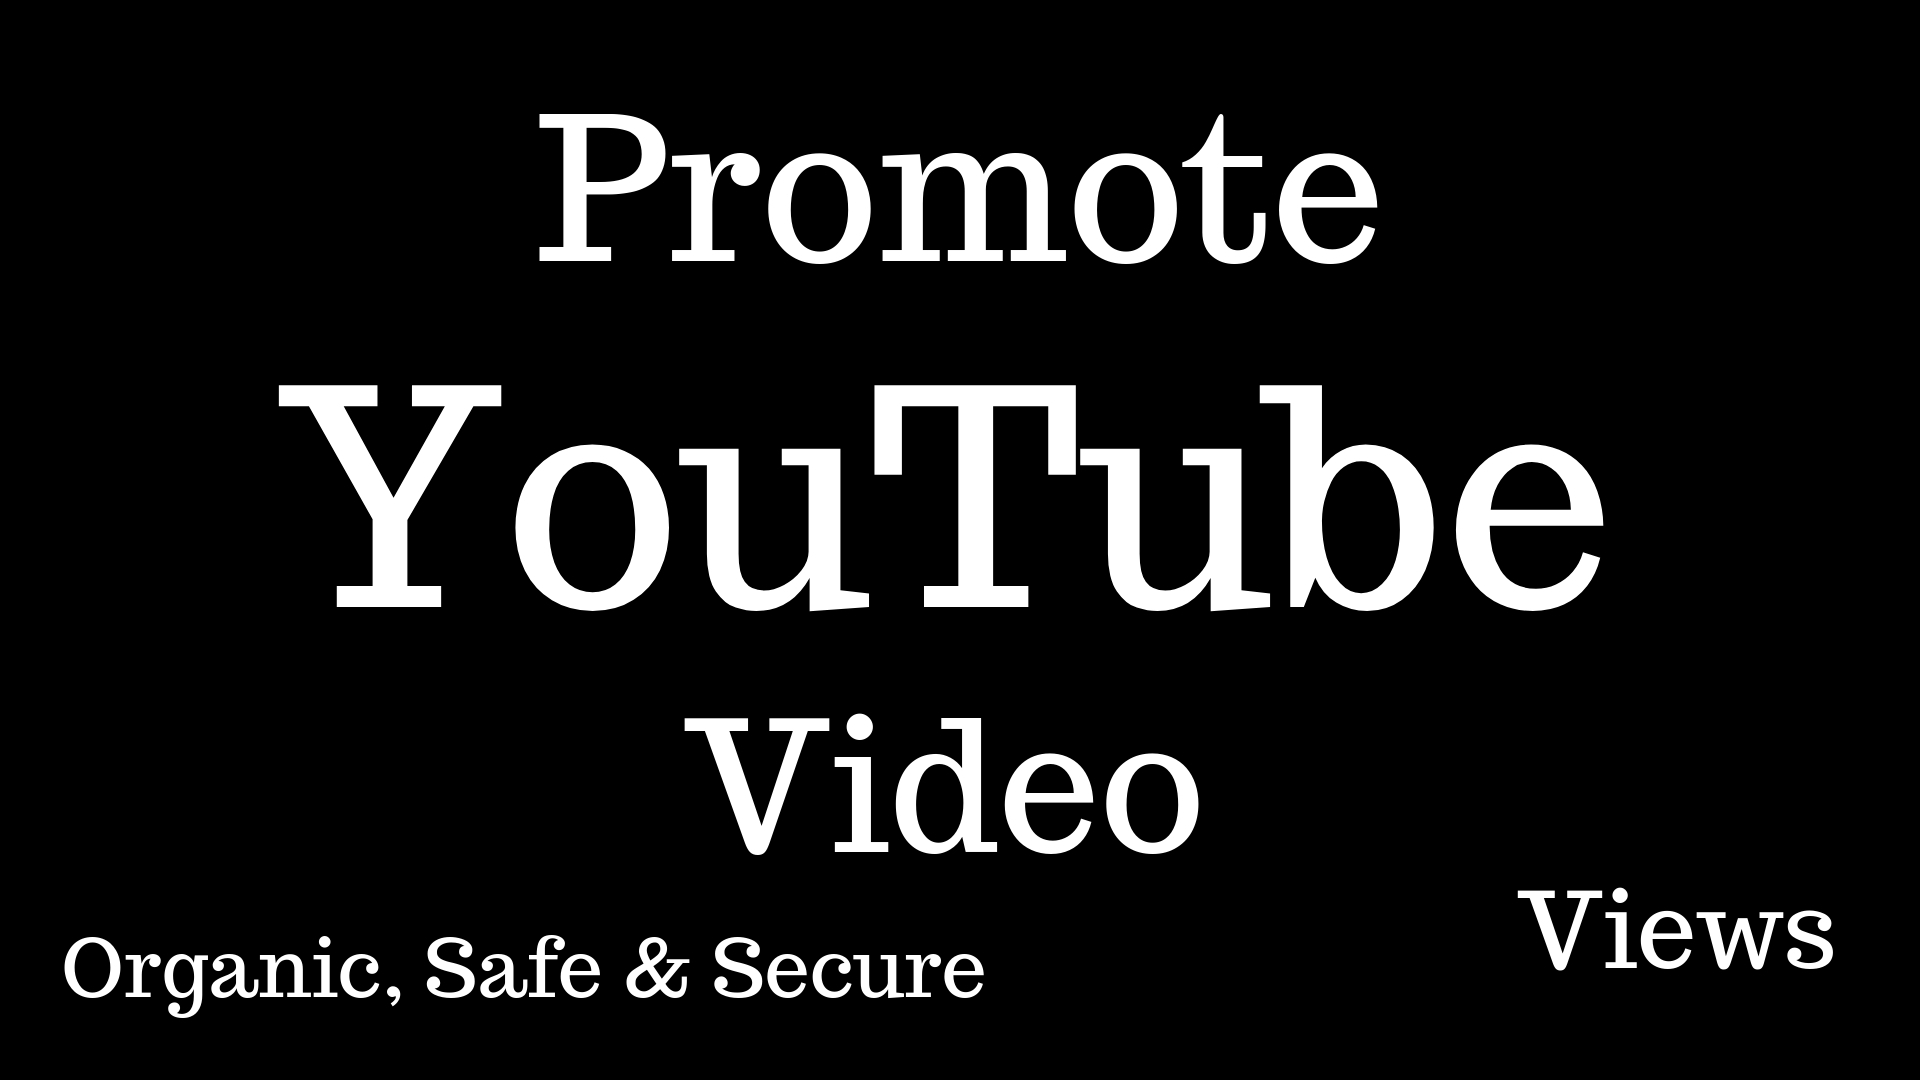 I’ll Promote and Increase your YouTube Video Views 1,000+ For Lifetime Guarantee